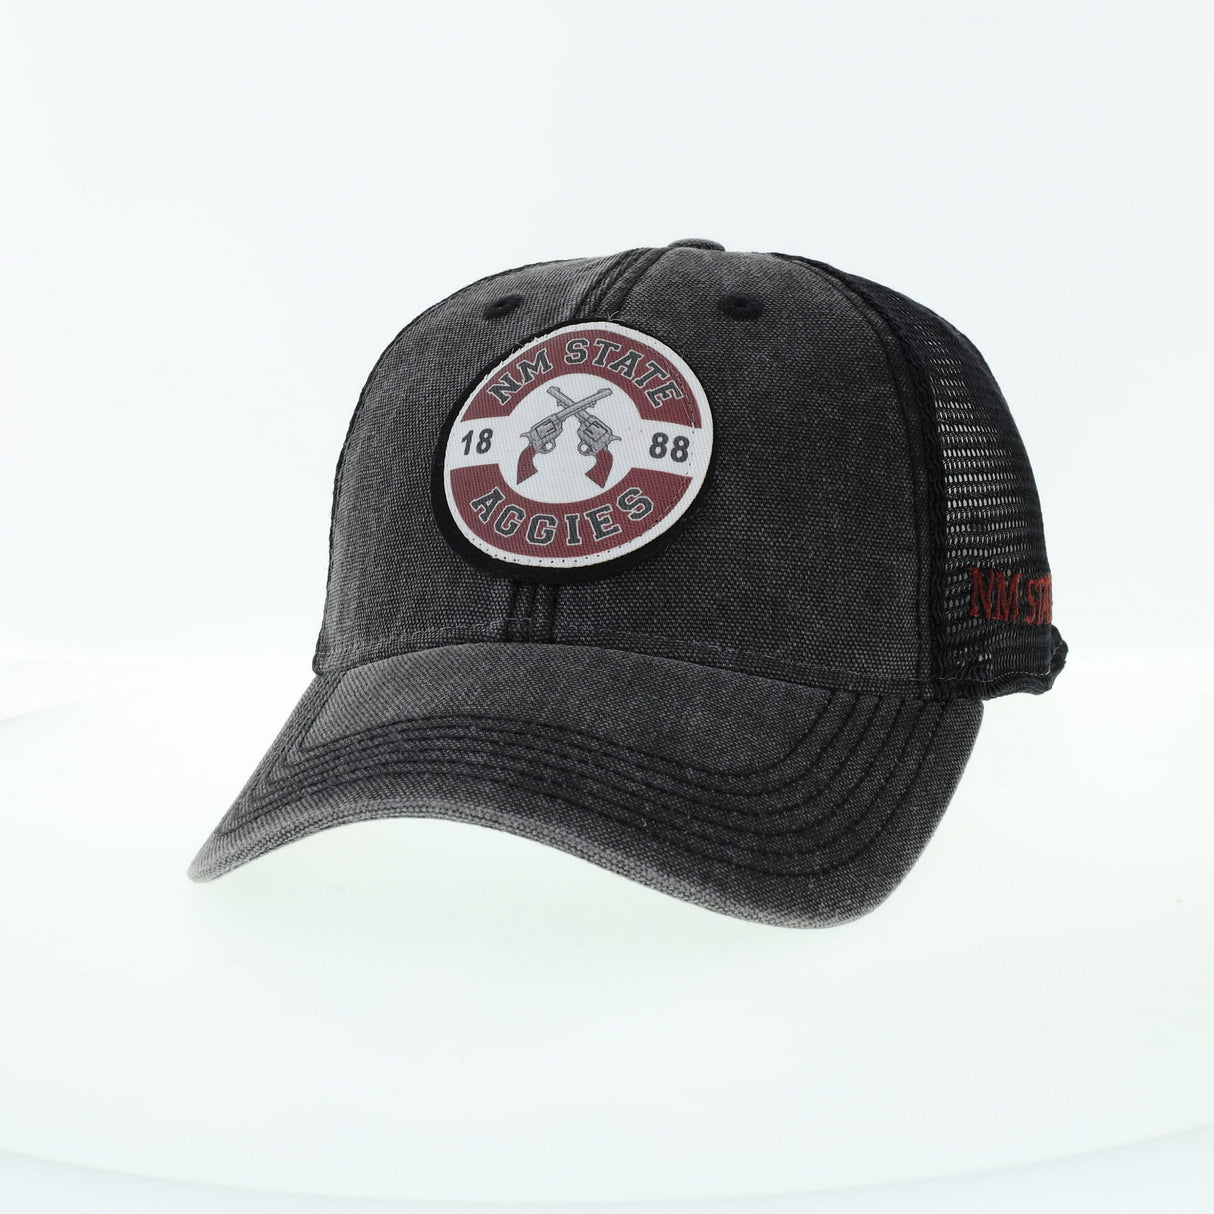 Dashboard Cross Pistols 1888 NM STATE AGGIES Legacy Hat